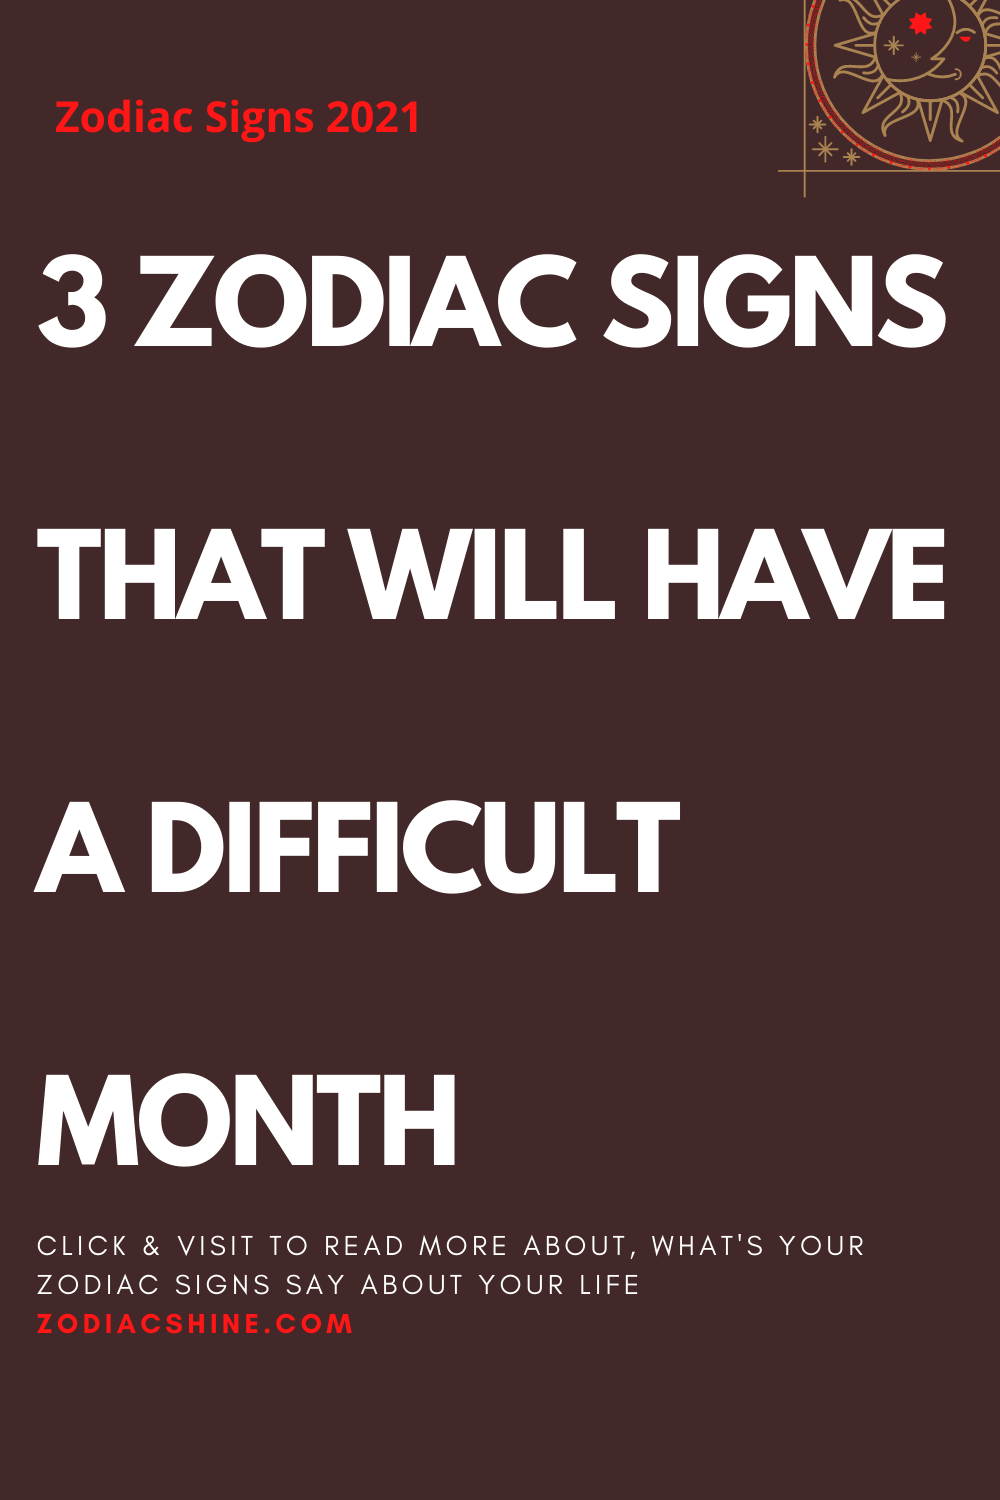 3 ZODIAC SIGNS THAT WILL HAVE A DIFFICULT MONTH